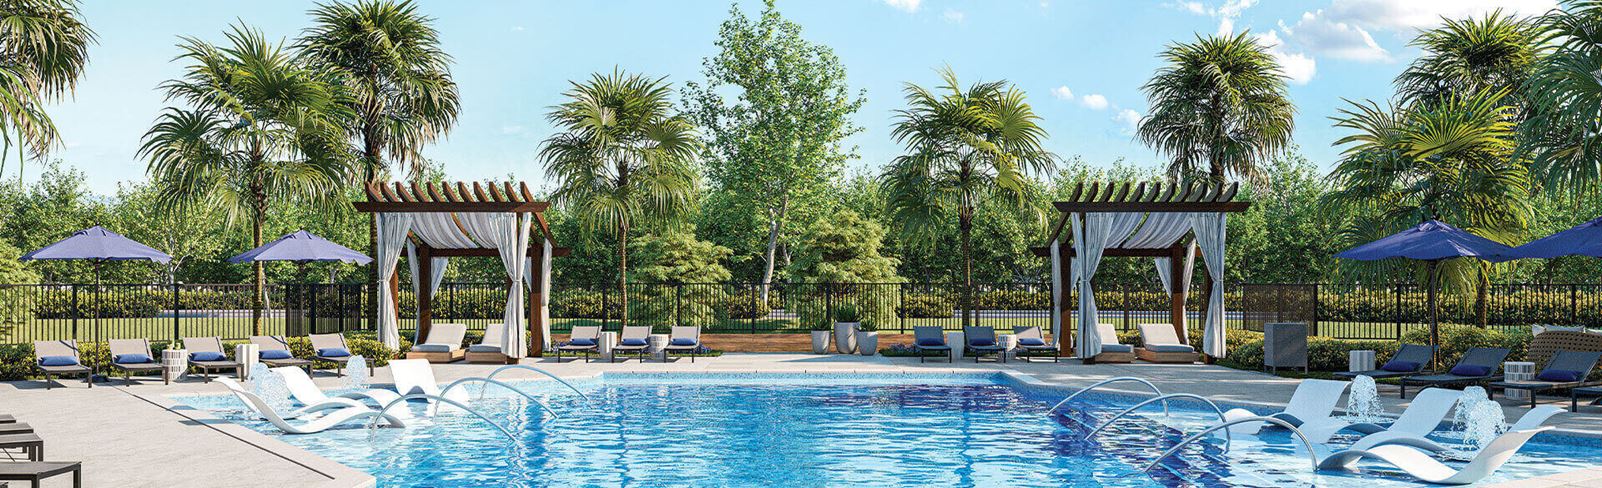 The pool area at The Murray, apartment homes in Nexton